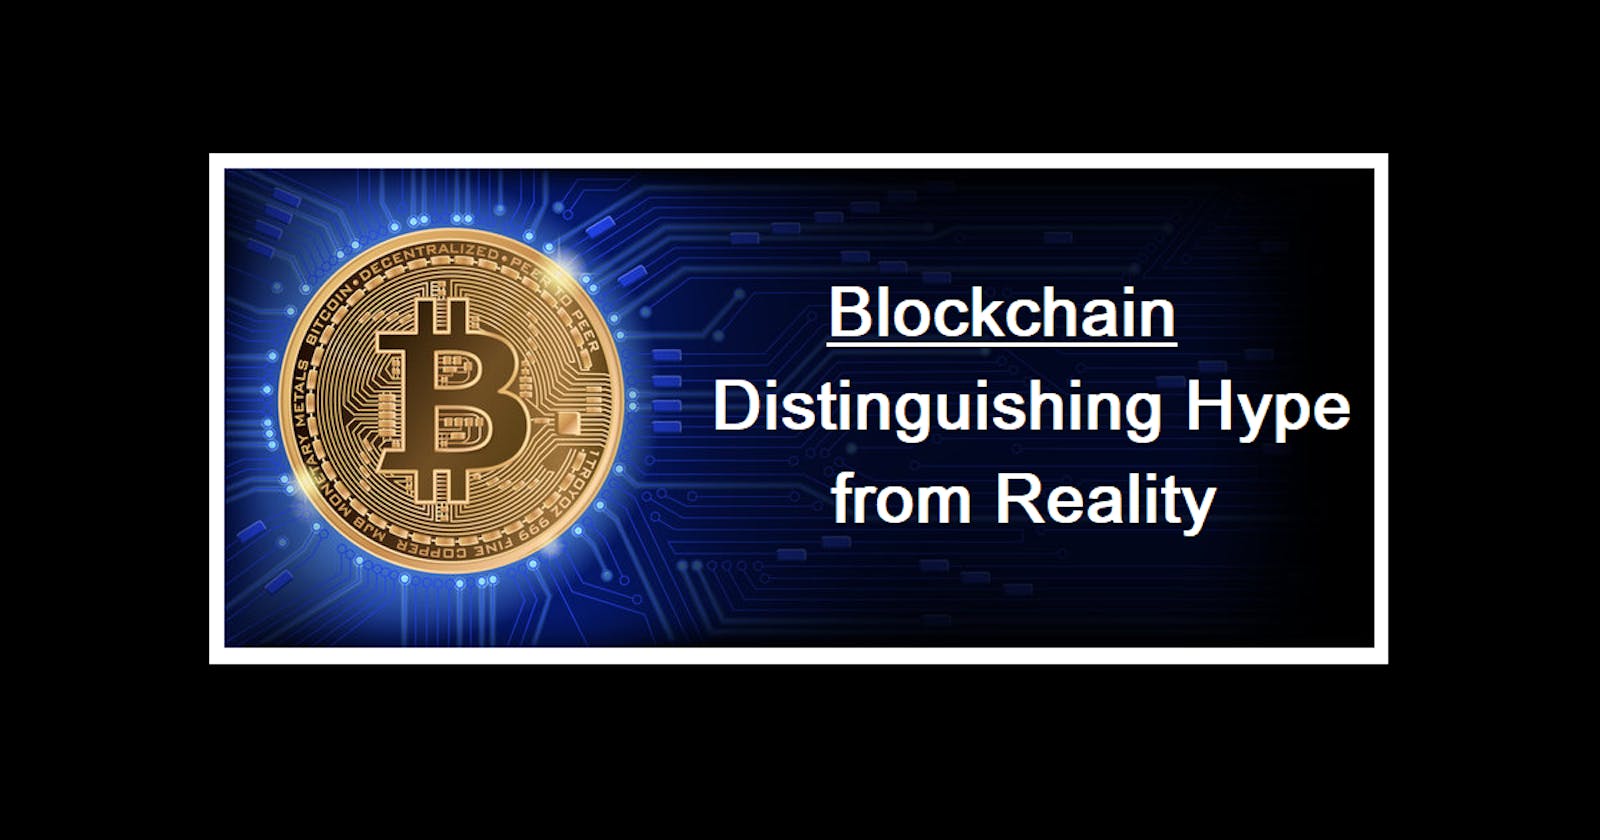 Blockchain: Distinguishing Hype from Reality